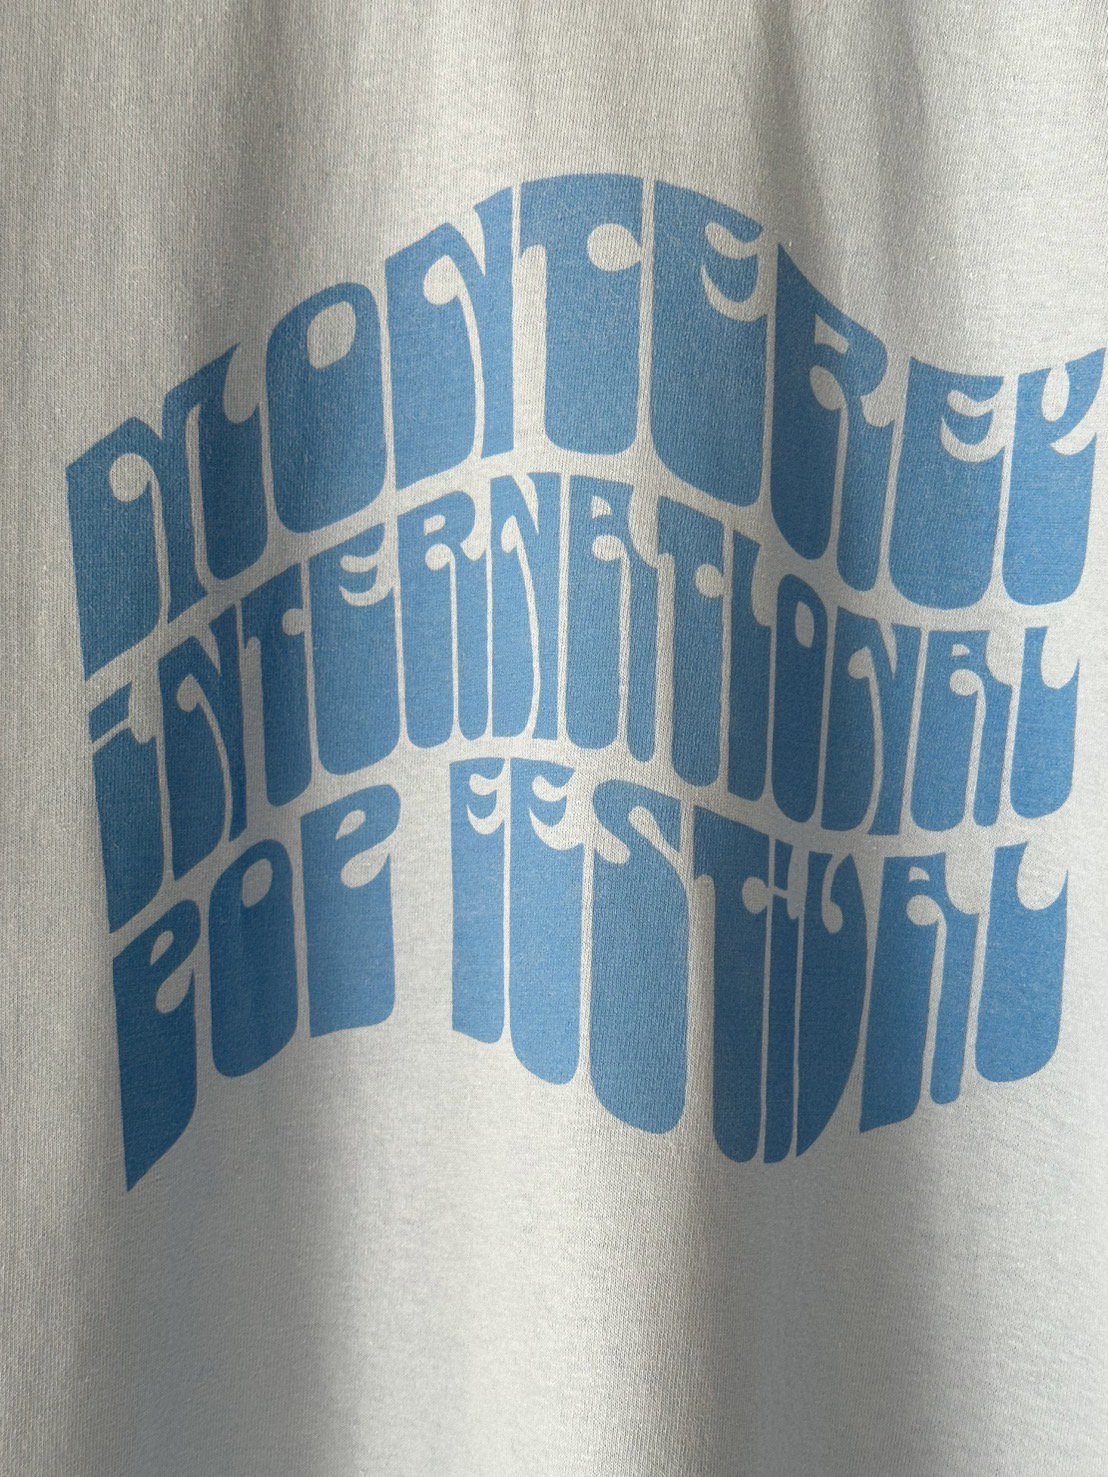 BLUESCENTRIC<br />MONTEREY POP FESTIVAL WAVE TEE / LT.BLUE<img class='new_mark_img2' src='https://img.shop-pro.jp/img/new/icons47.gif' style='border:none;display:inline;margin:0px;padding:0px;width:auto;' />